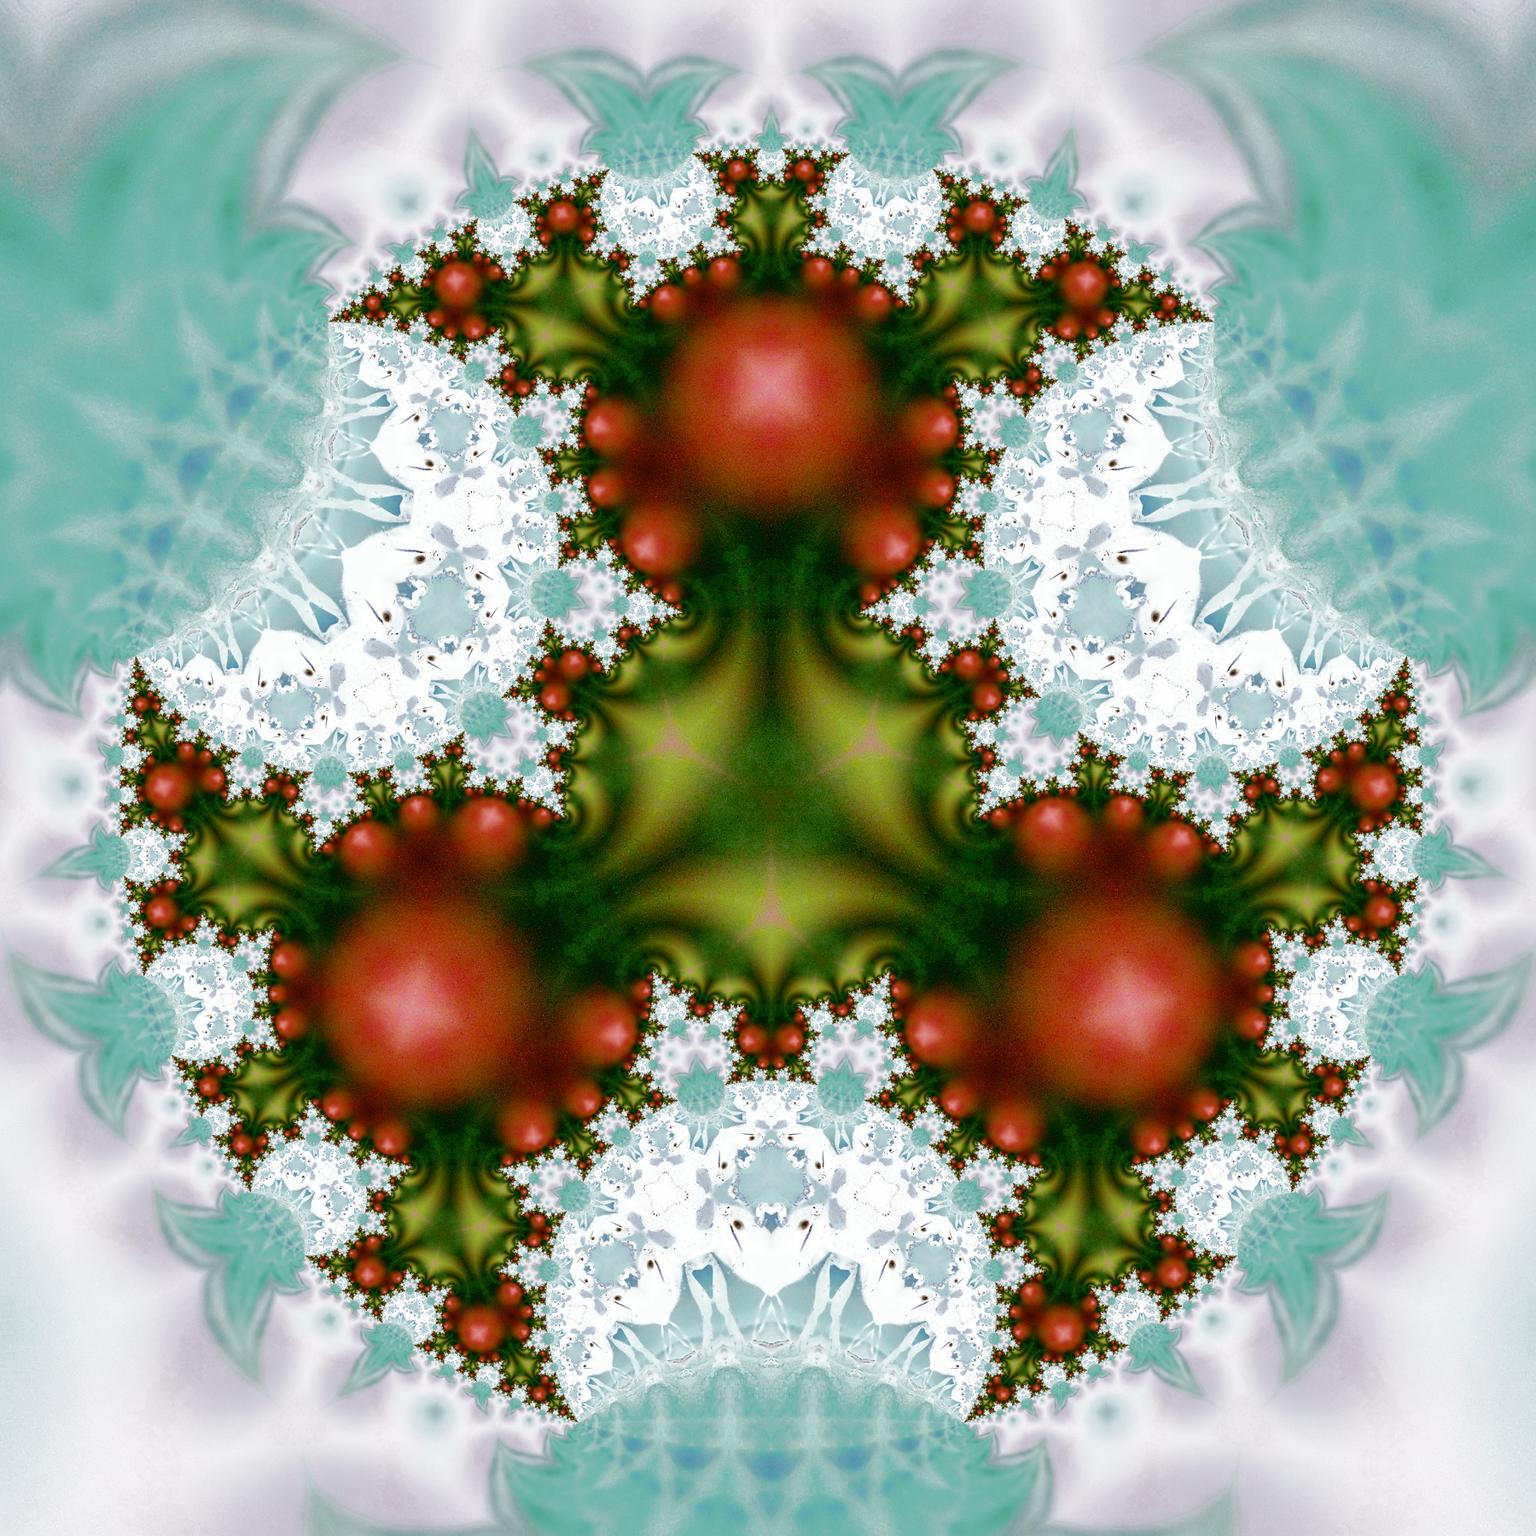 Image for entry 'Fractal Holly'